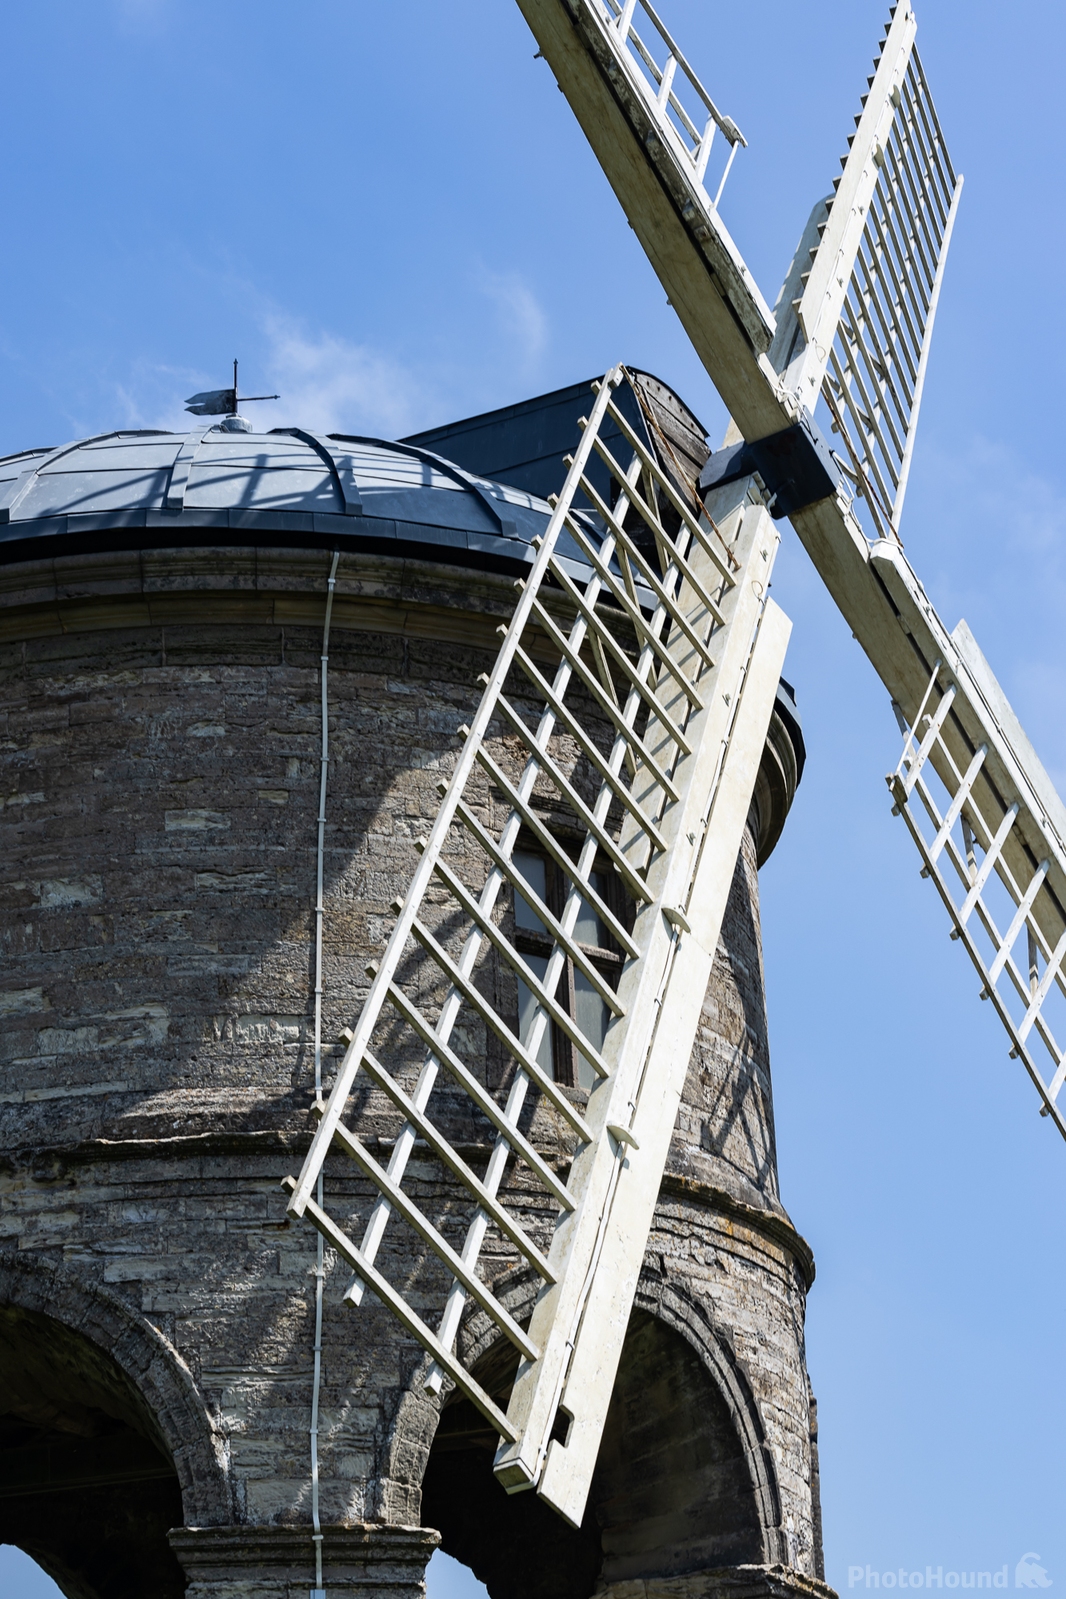 Image of Chesterton Windmill by Carol Henson